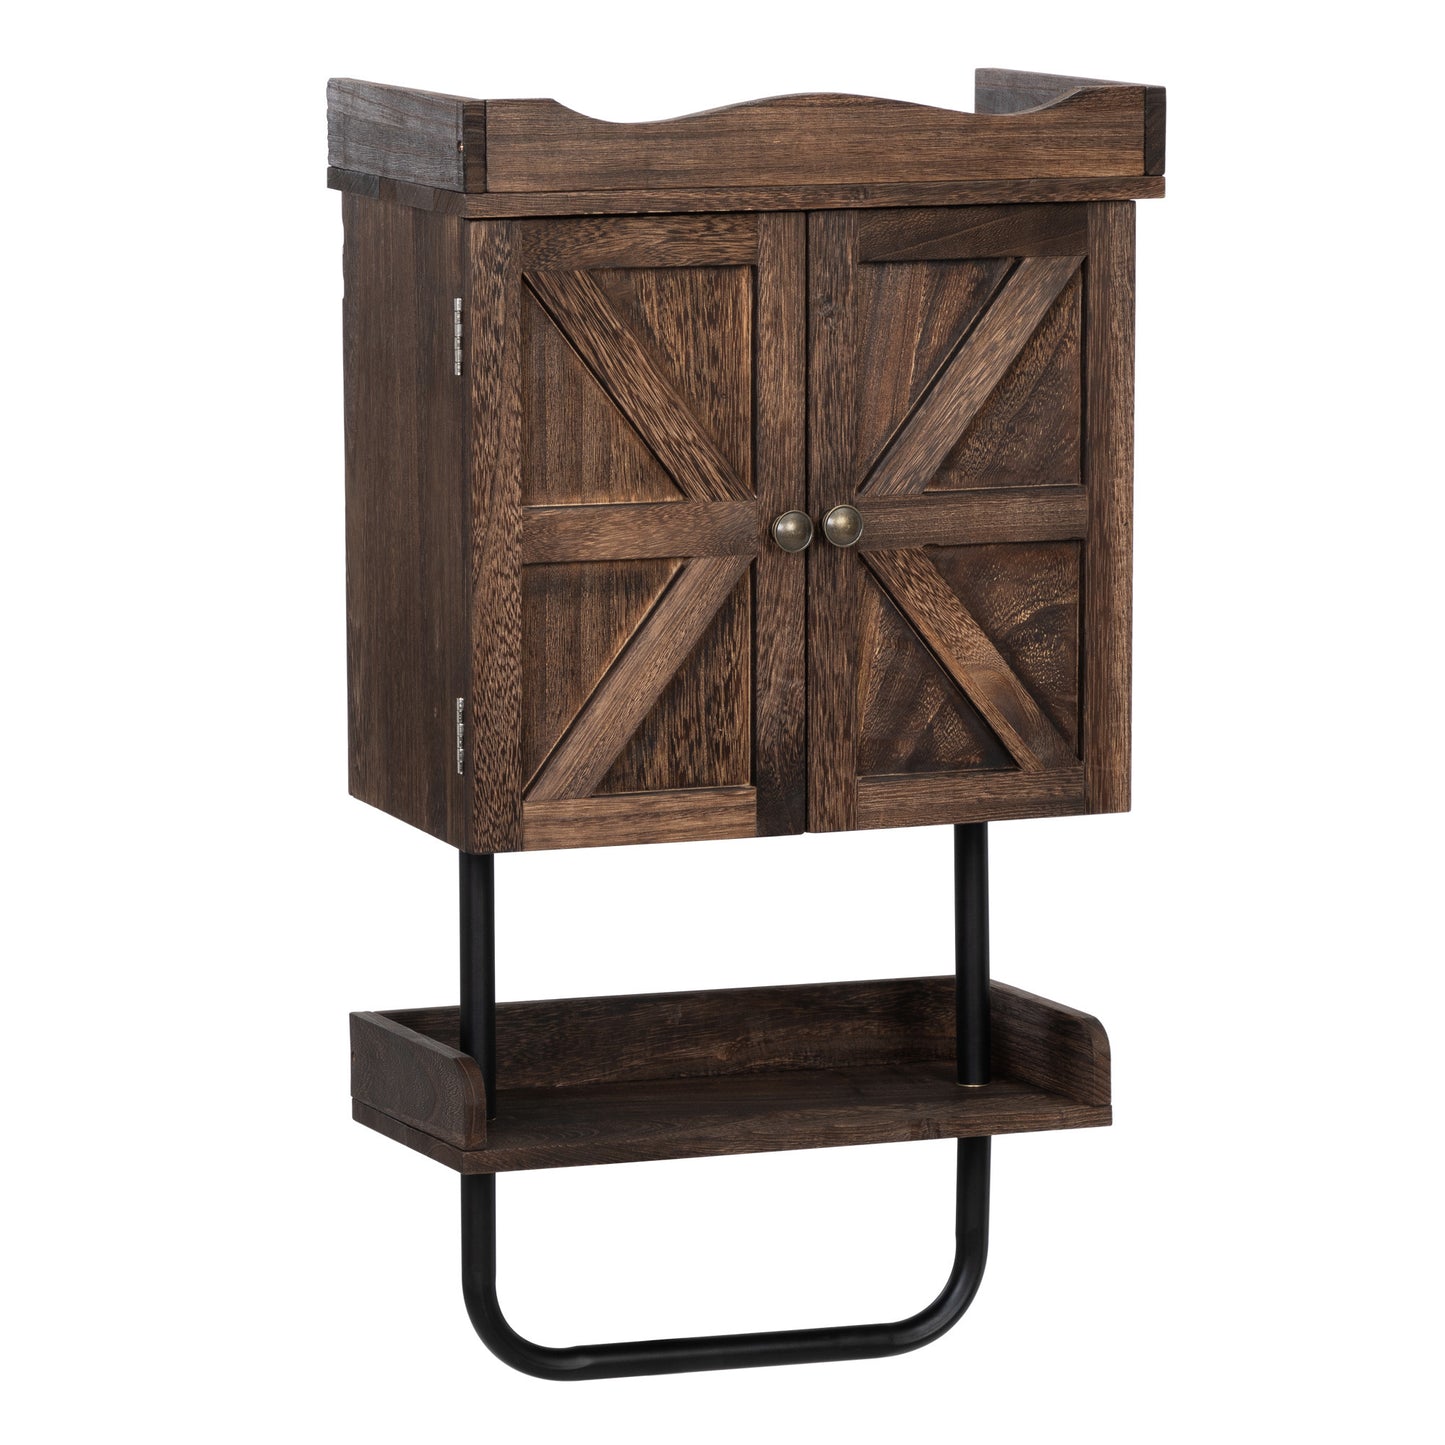 Bathroom Storage Cabinet with One Open Shelf, Wall Mounted Wooden Cabinet, Antique Brown